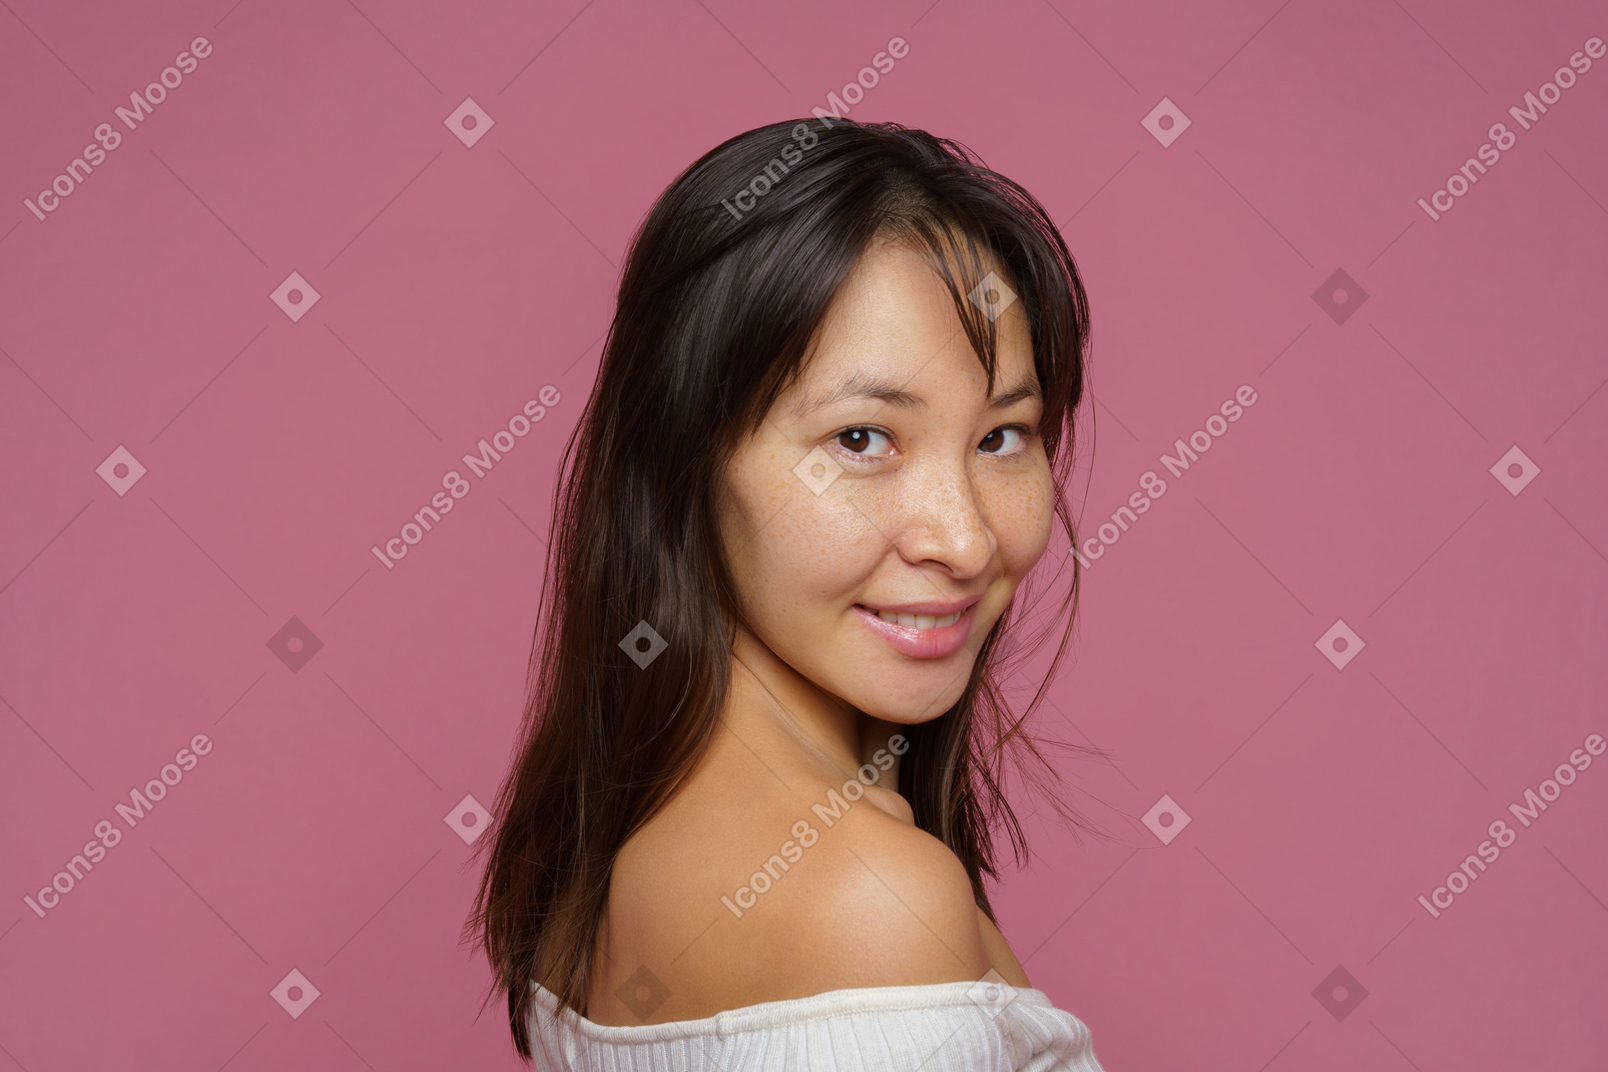 Three-quarter back view of a smiling young female looking at camera